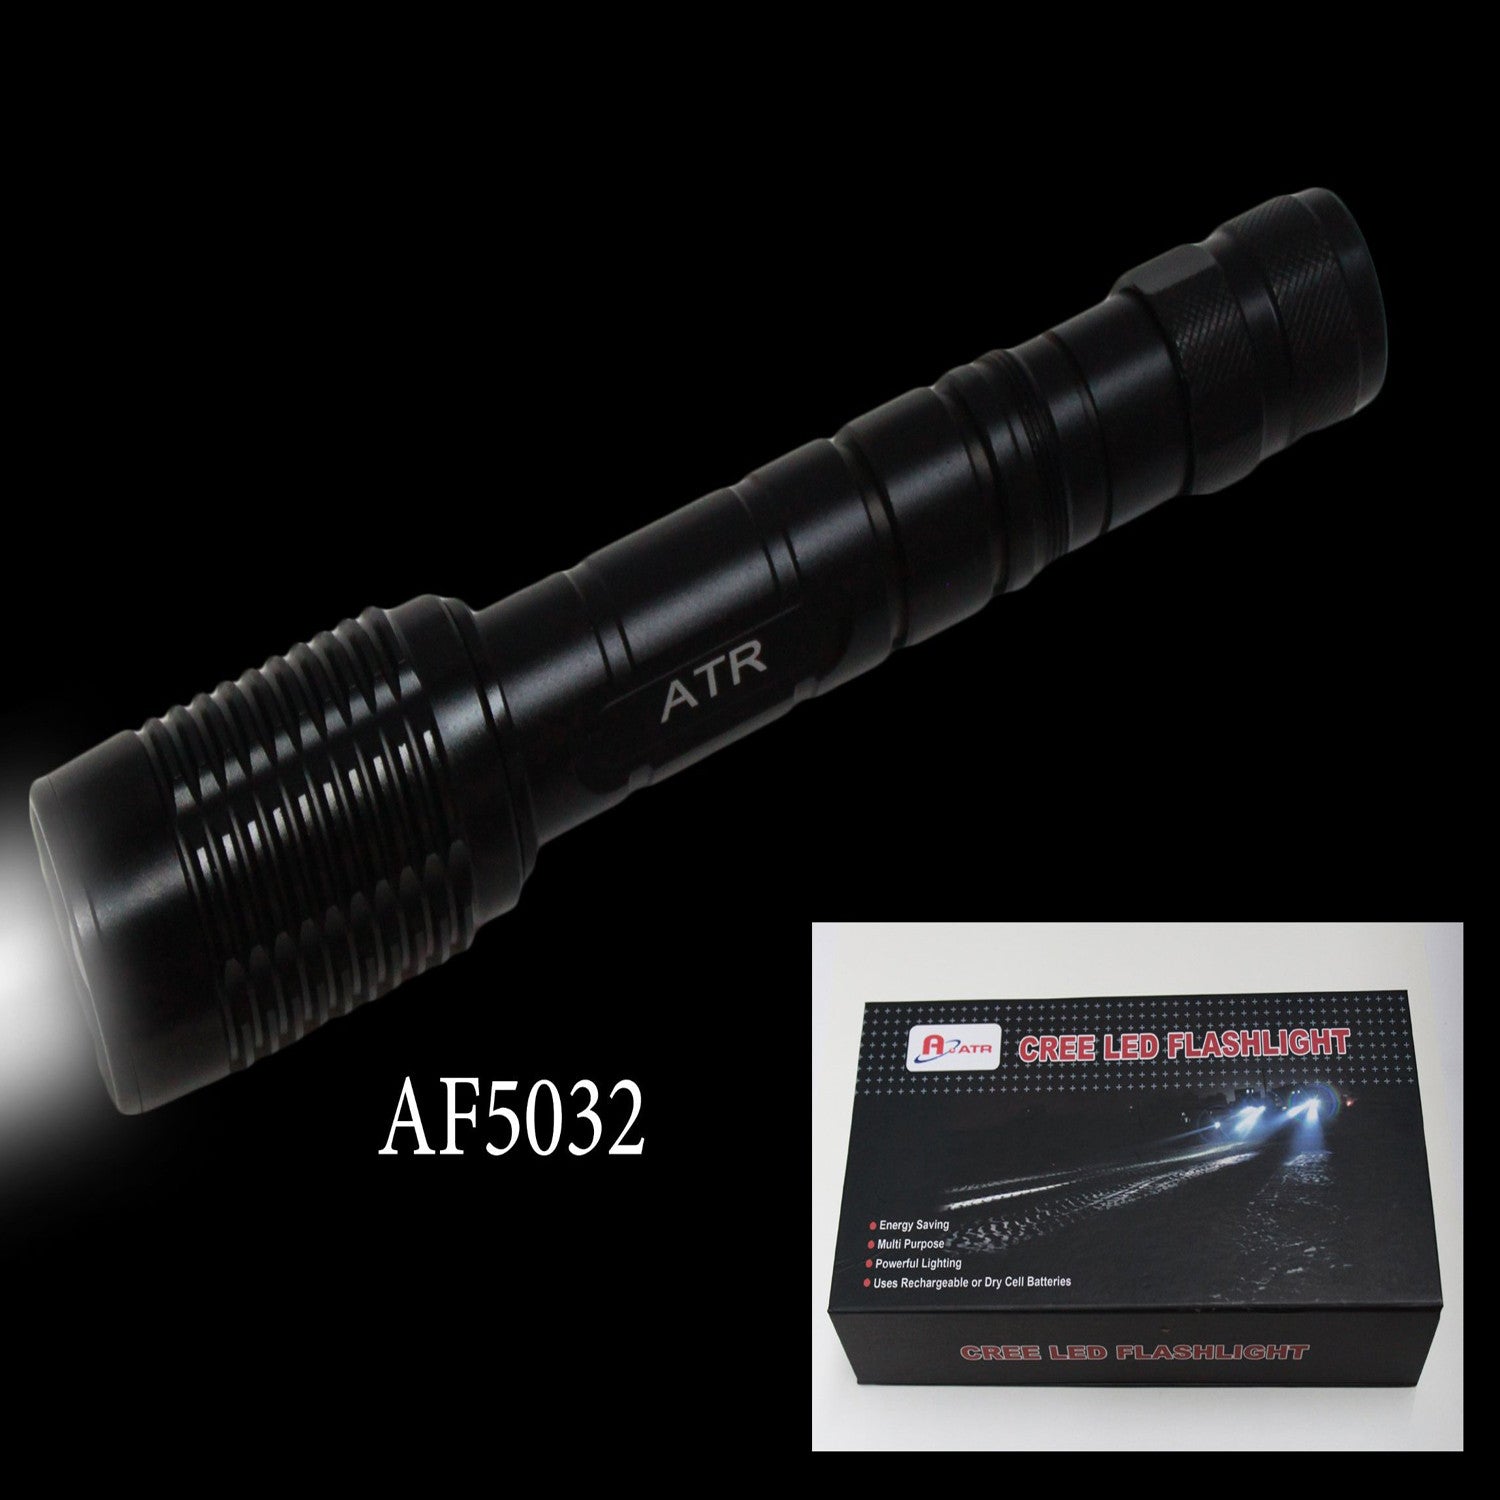 Rechargeable Power Style LED Focalize T6 Cree LED Flashlight